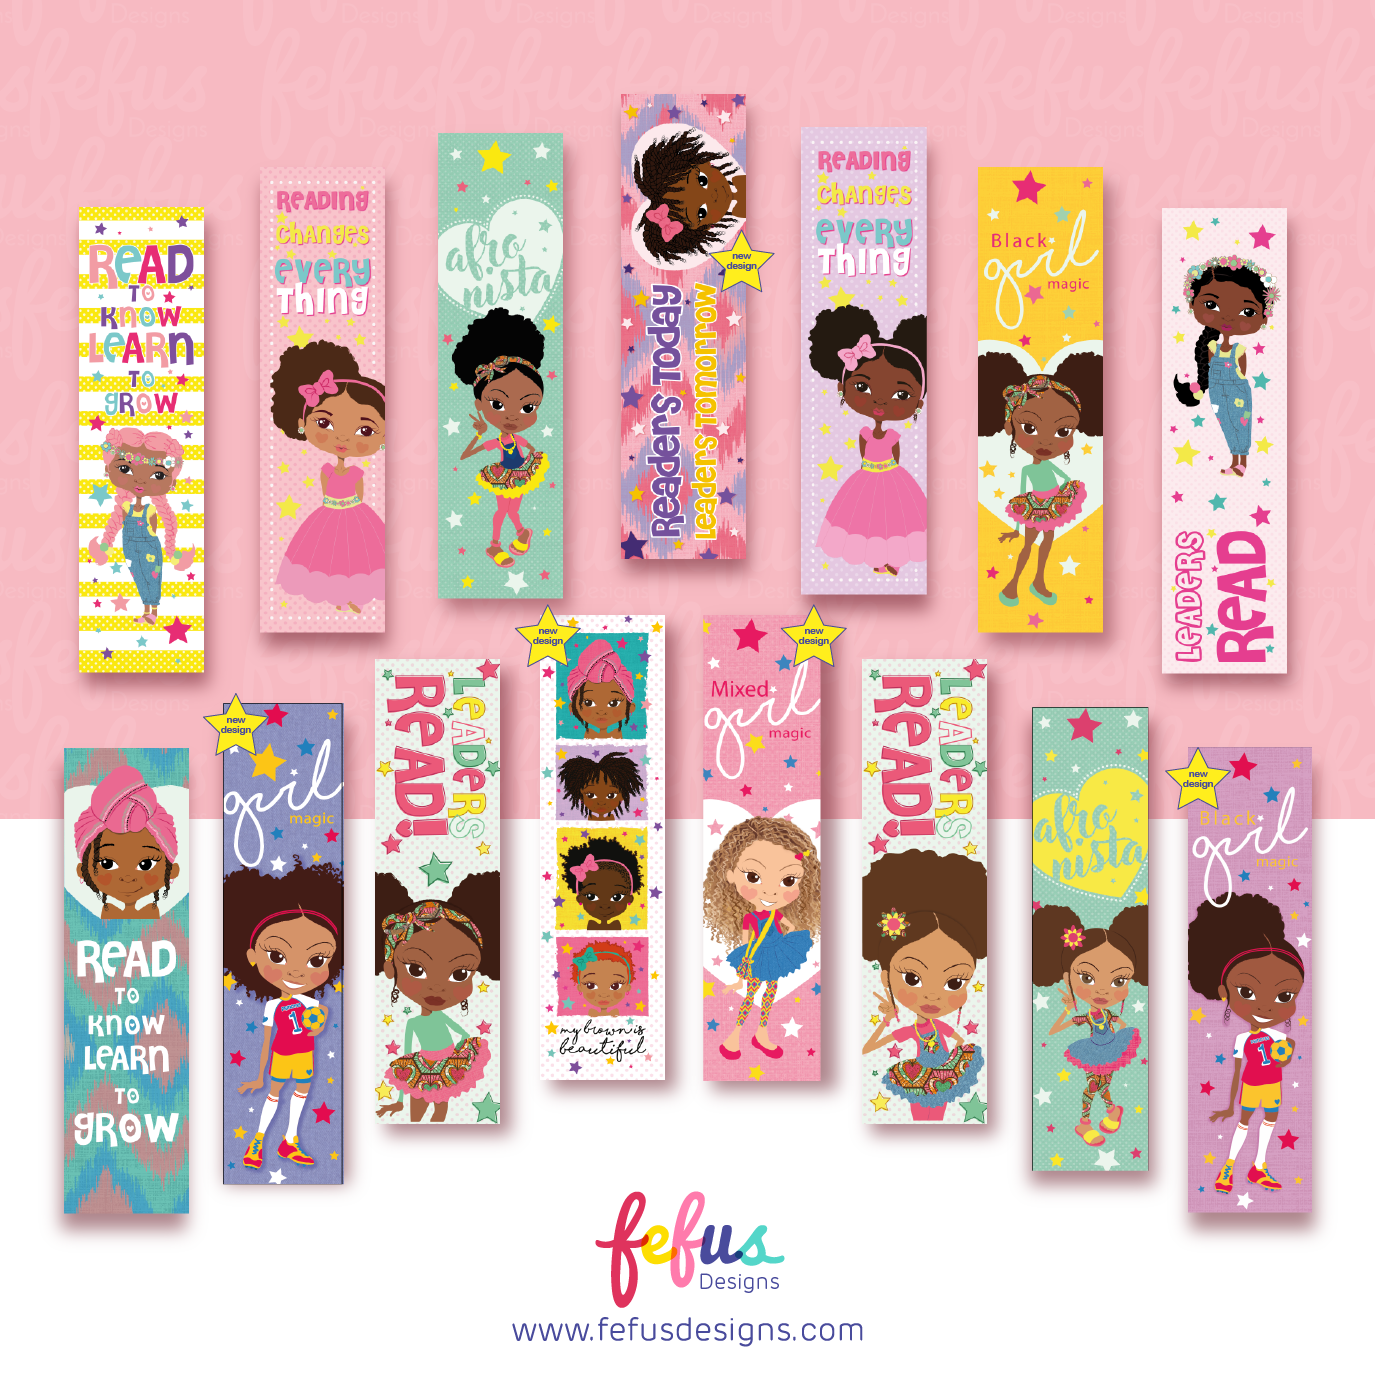 Reading Changes Everything - Multicultural Girls Bookmarks | Fefus designs